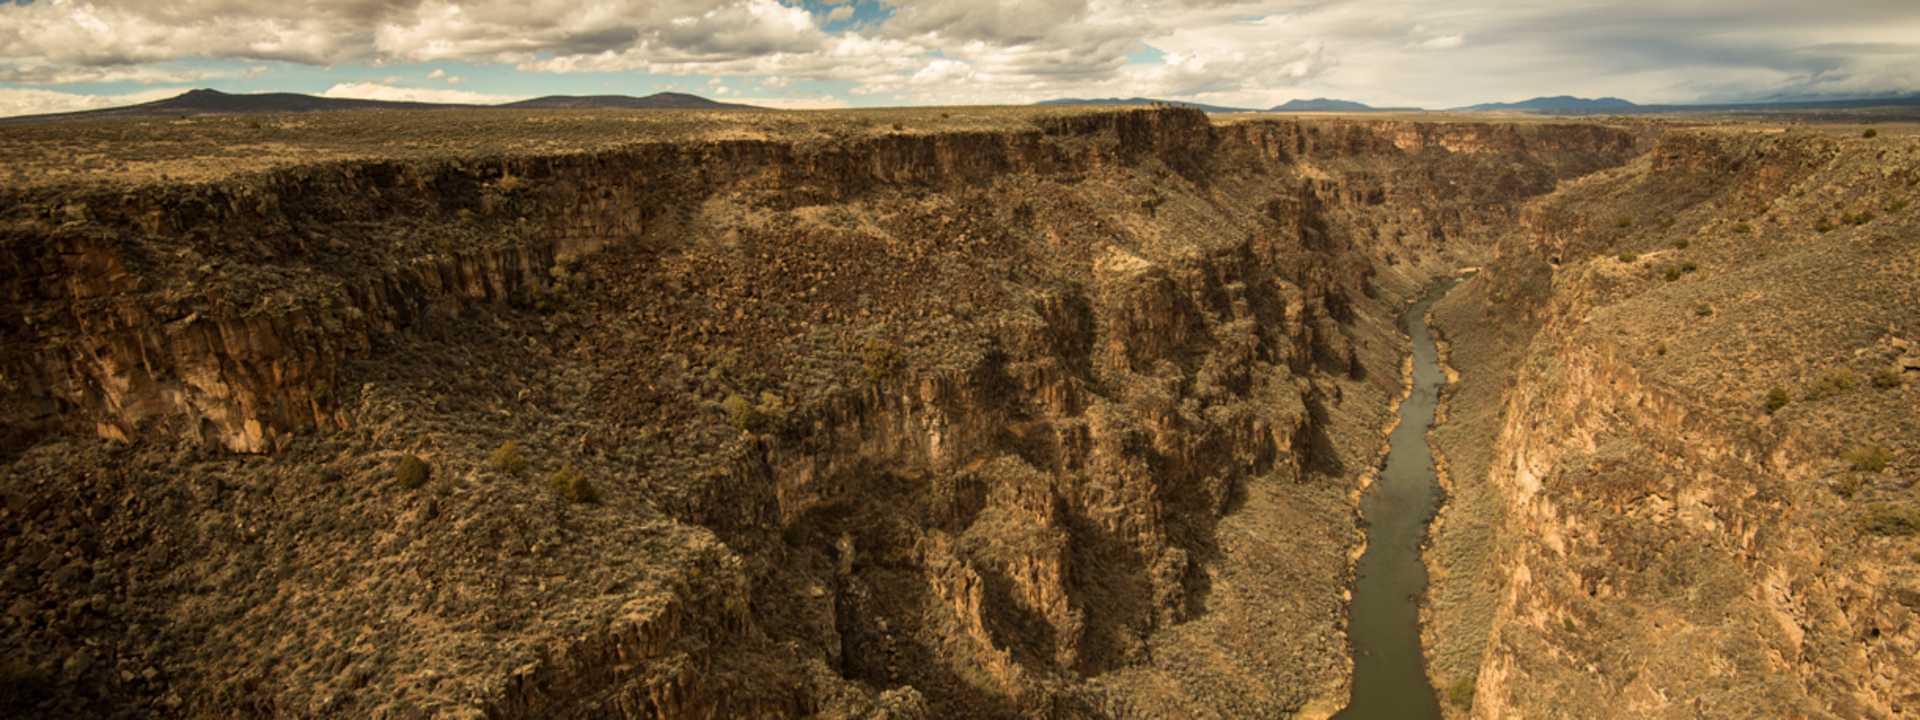 Aerial view of the Rio Grande Gorge in northern New Mexico